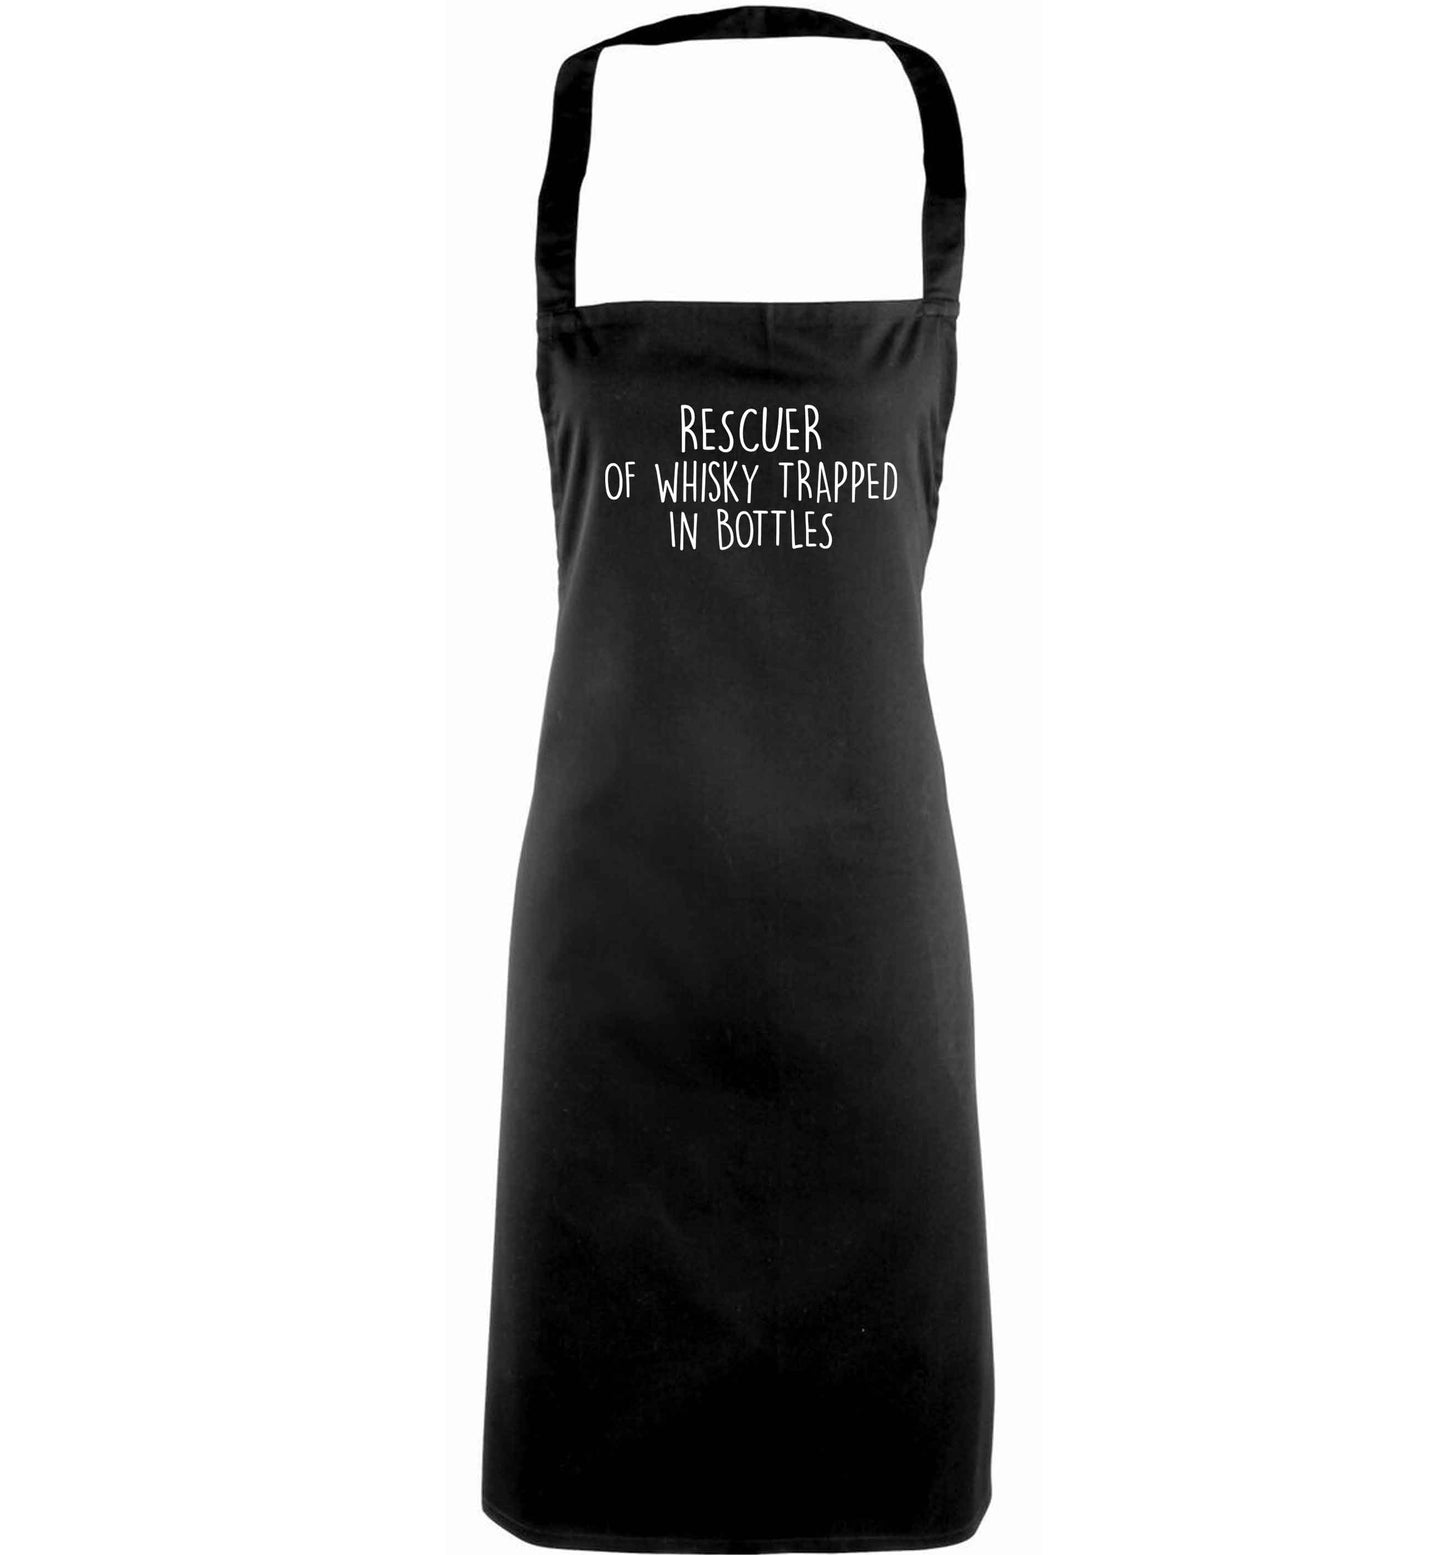 Rescuer of whisky trapped in bottles adults black apron